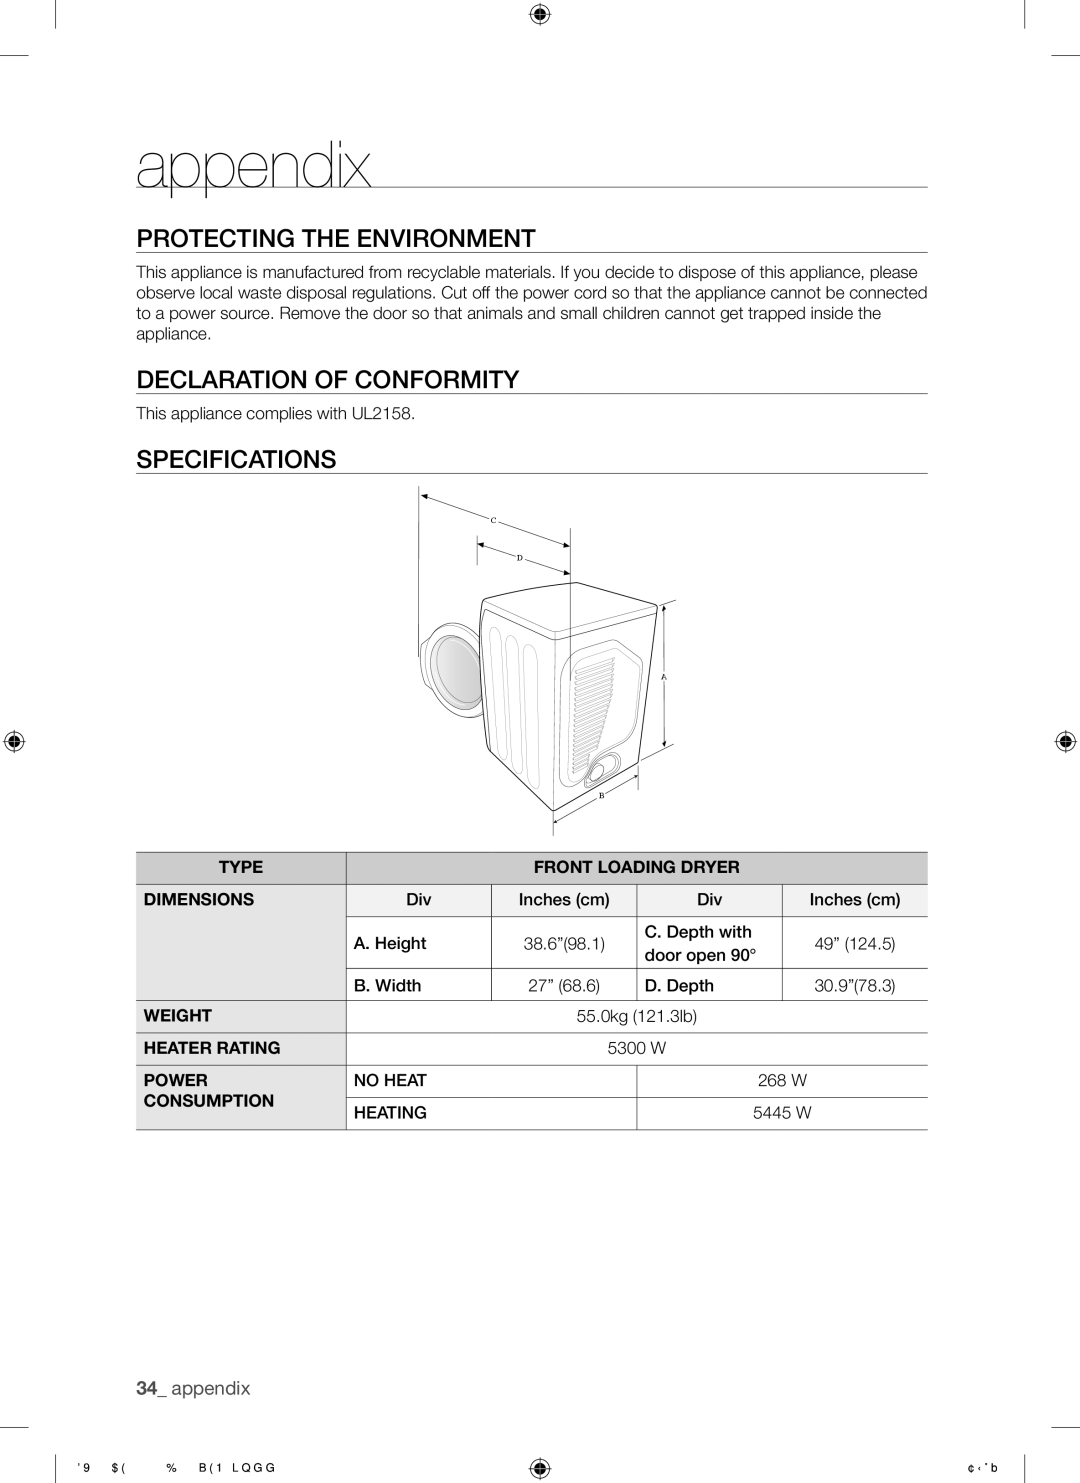 Samsung DV340AEW, DV330AEW user manual Protecting the Environment, Declaration of Conformity, Specifications 